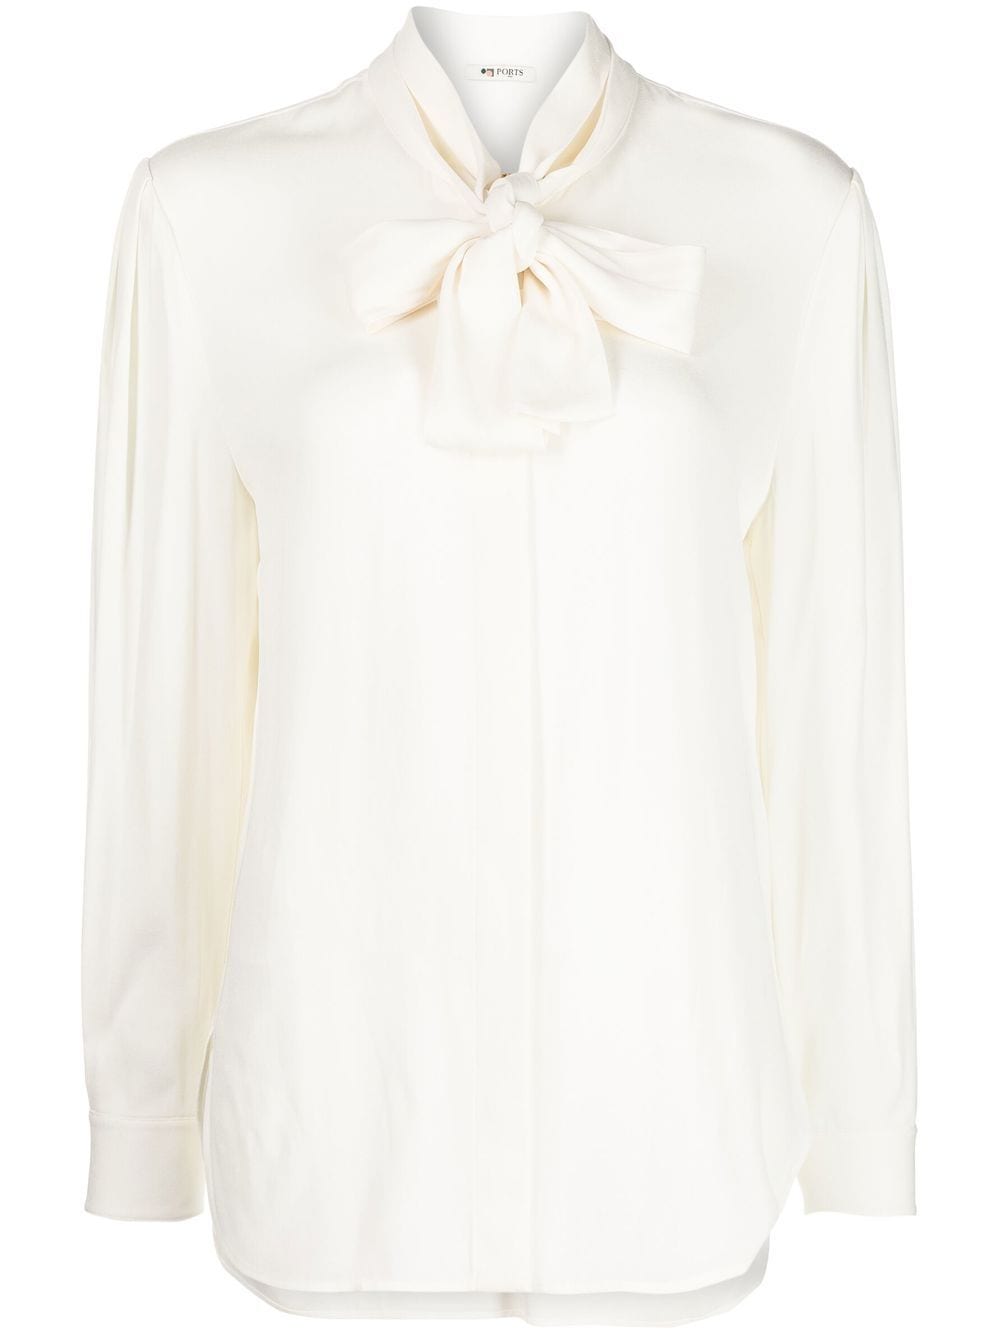 Ports 1961 lace-up long-sleeved blouse - White von Ports 1961